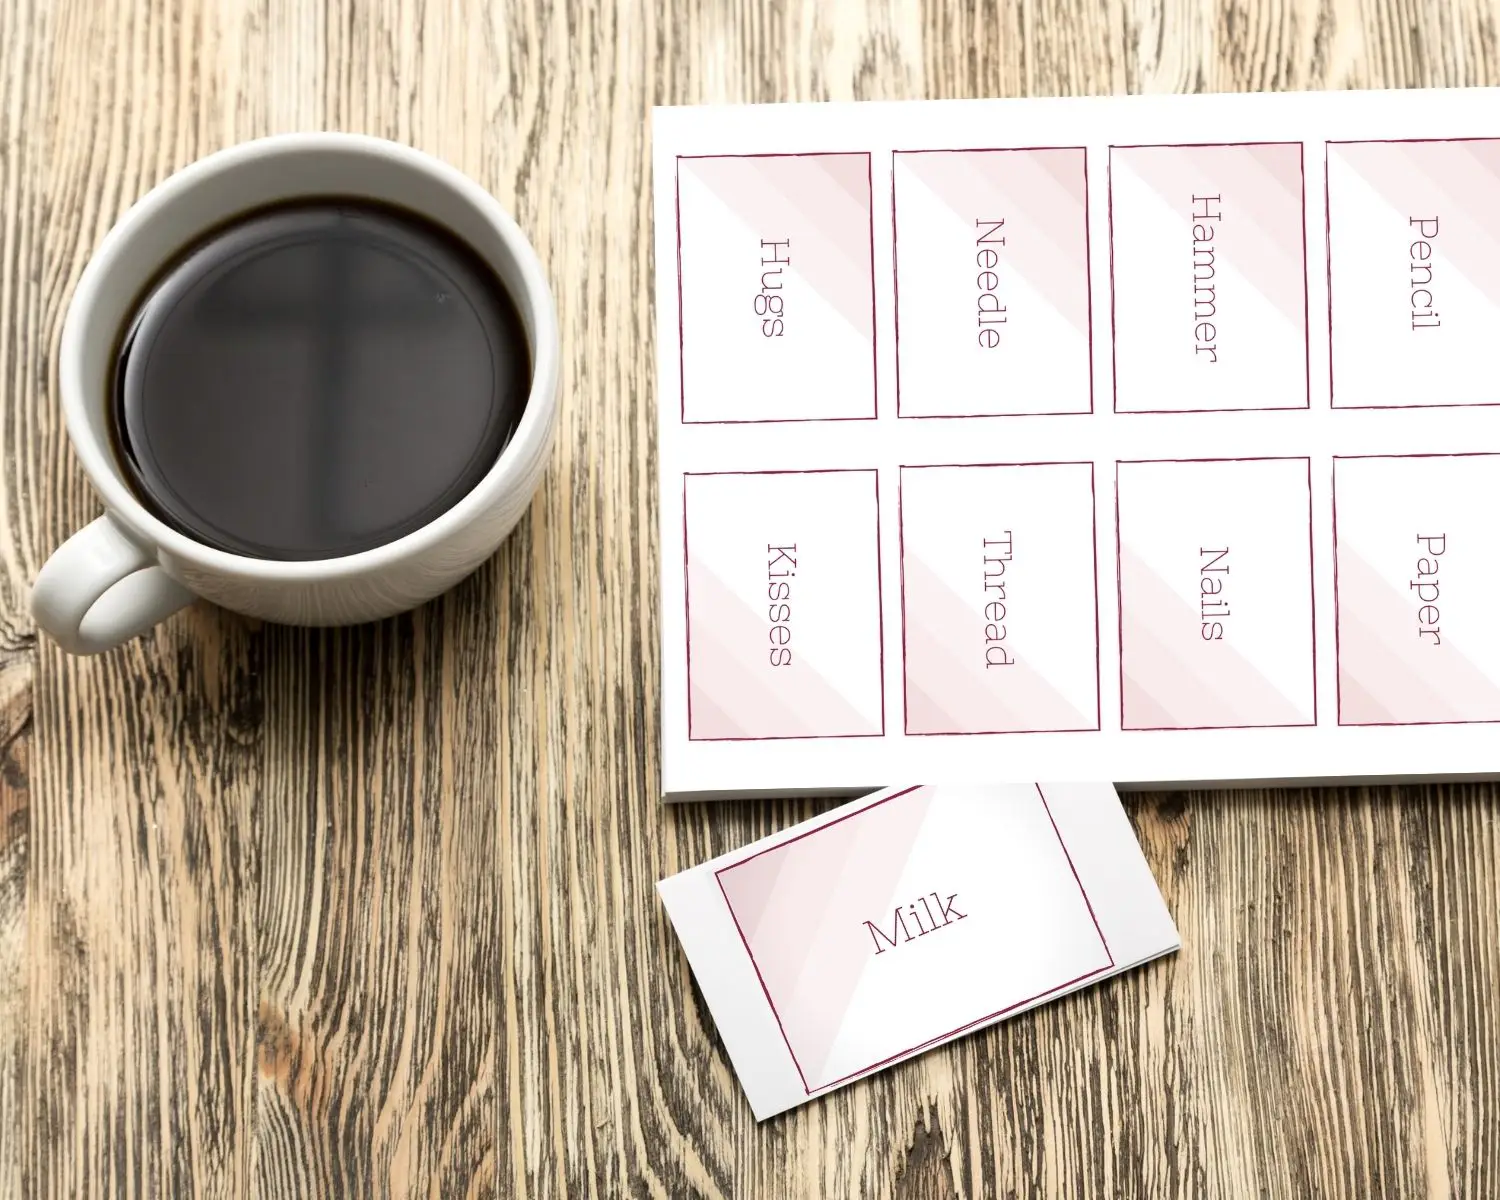 A sheet of find your pair cards sits next to a mug of coffee on a table